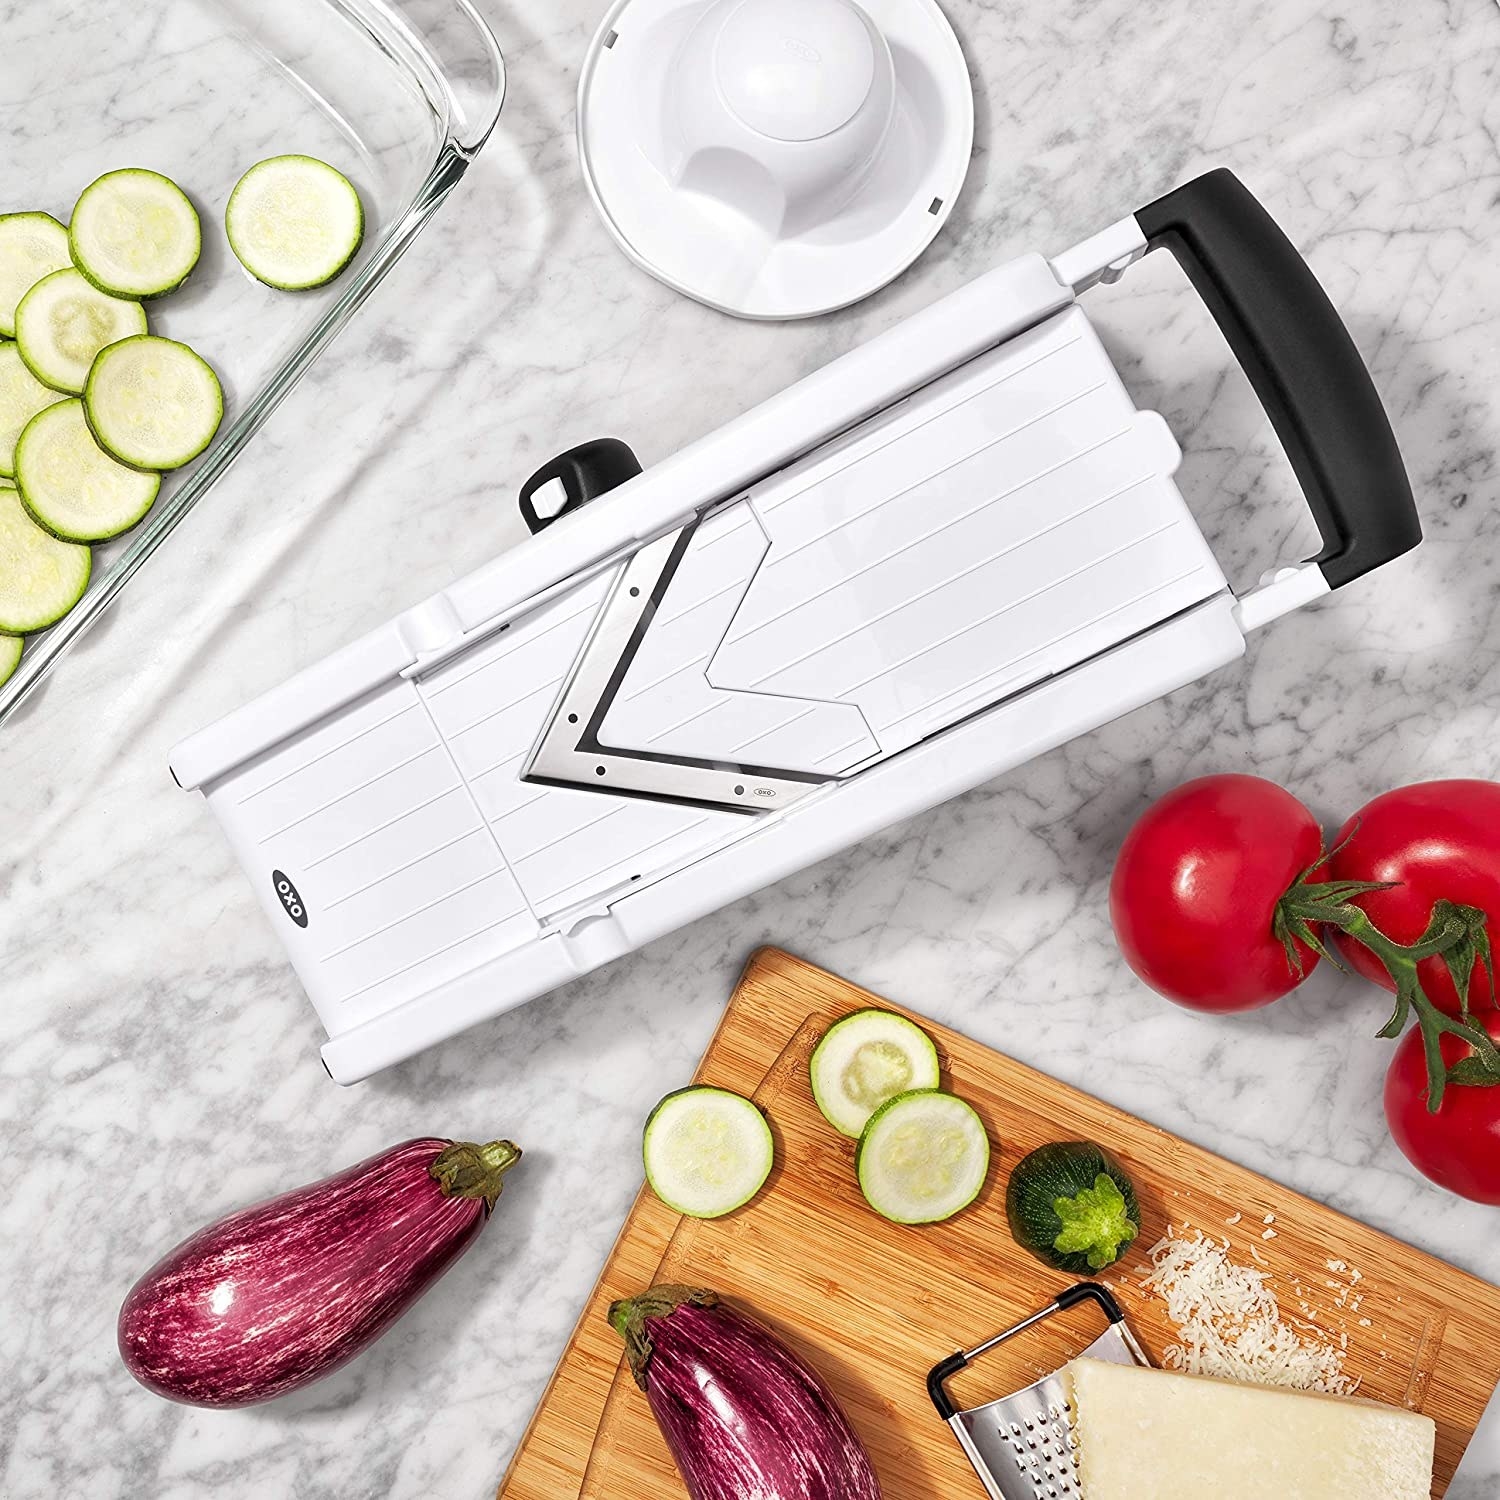 A mandolin slicer on a table surrounded be vegetables